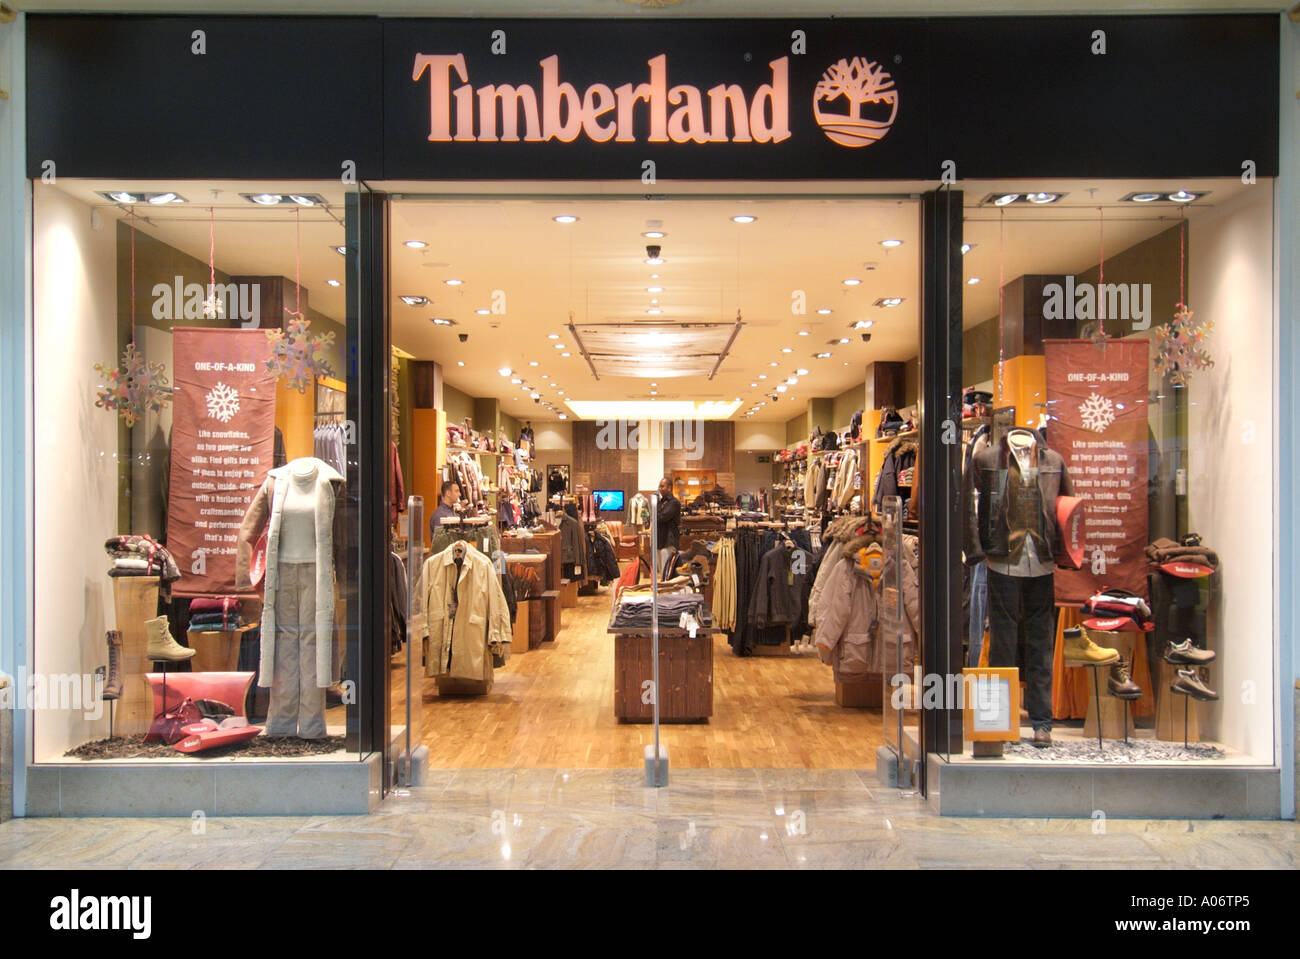 timberland outlet uk, OFF 78%,Best 